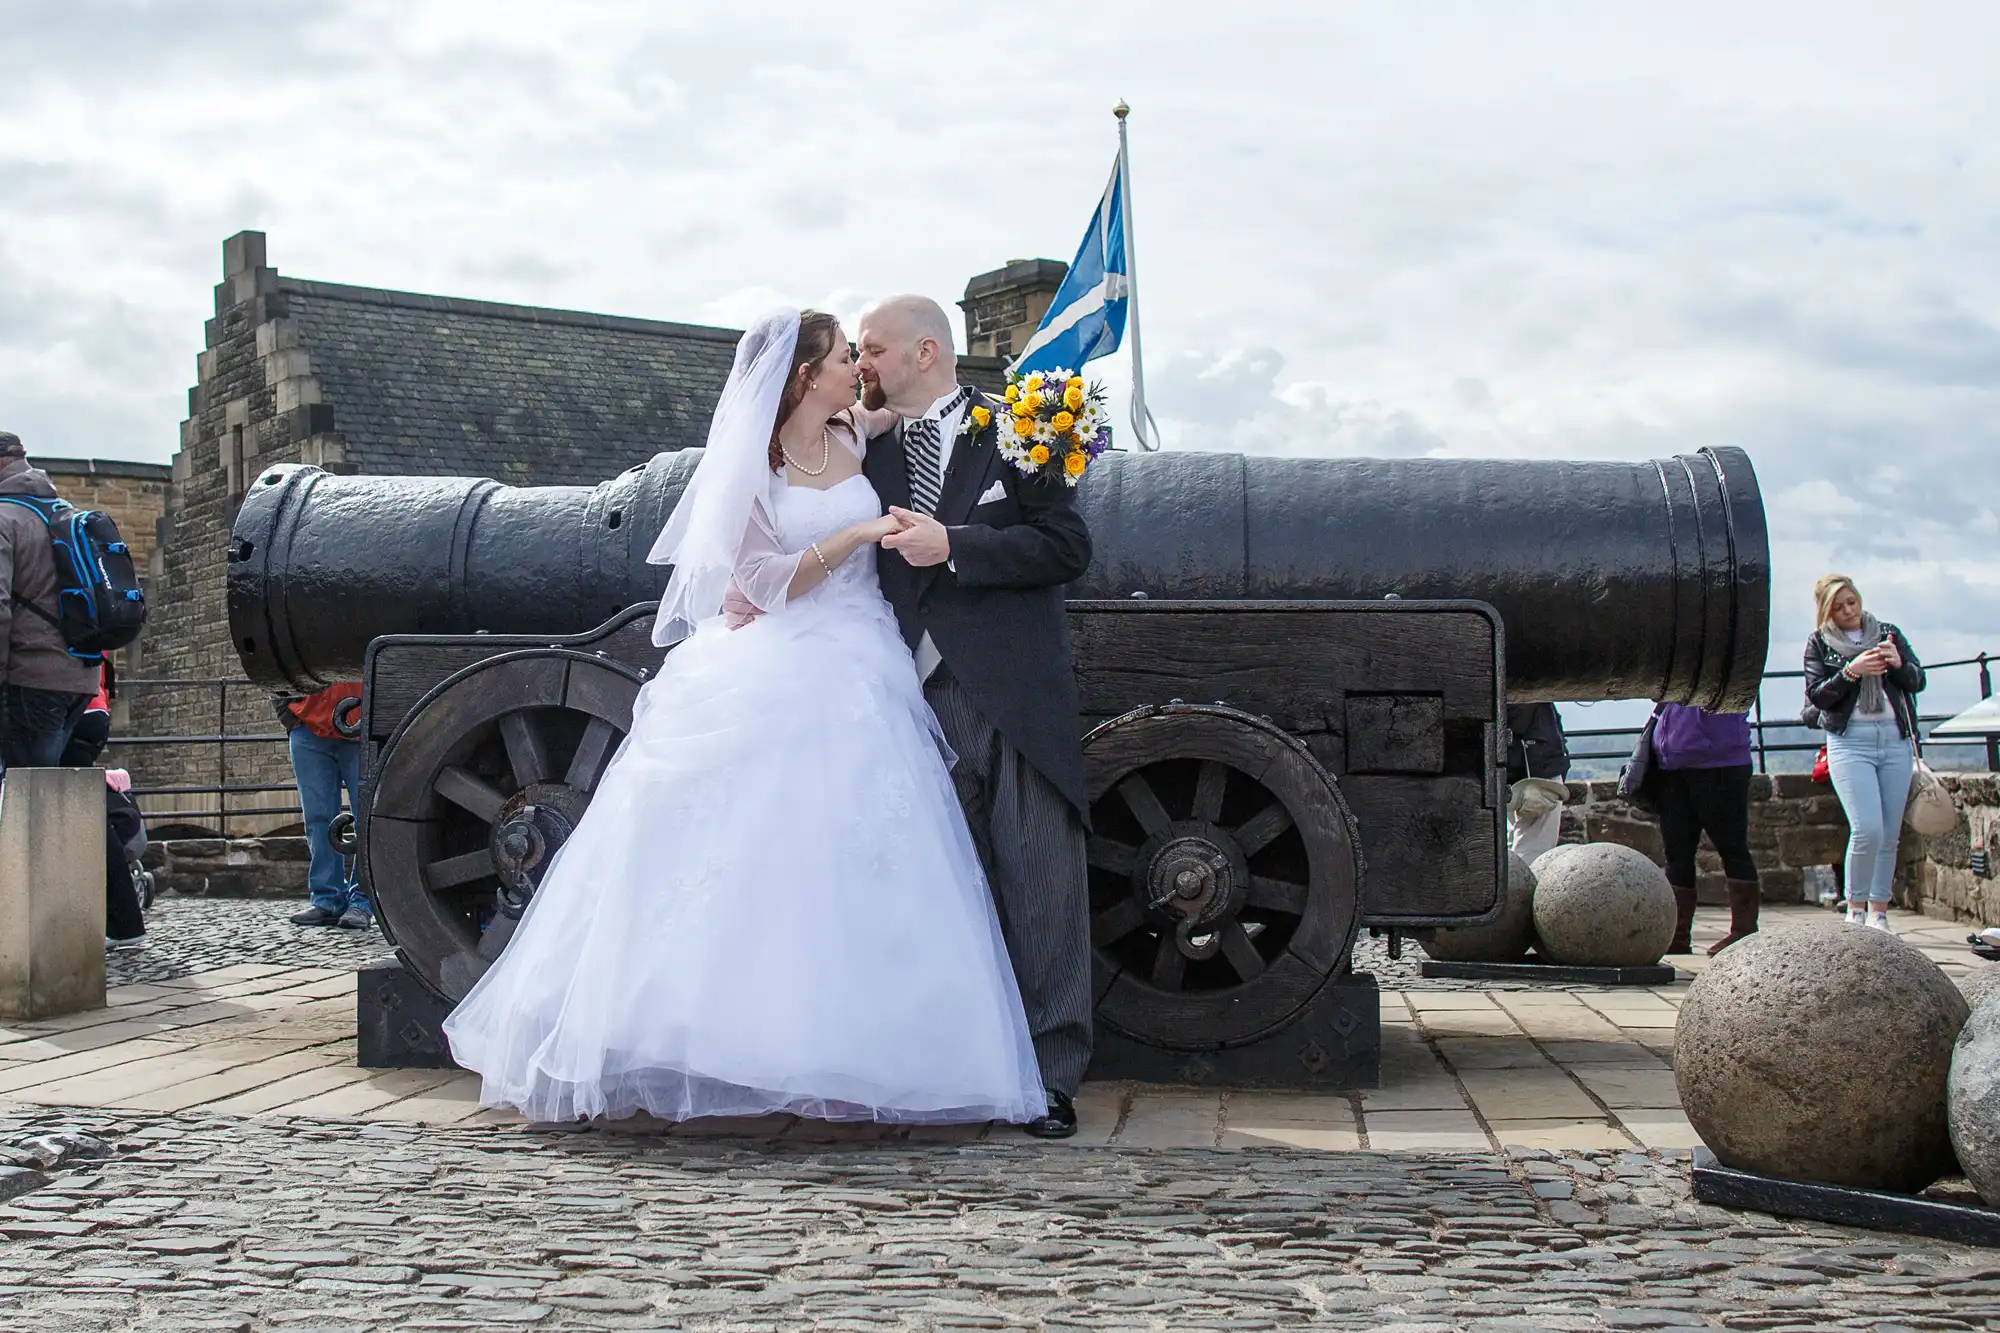 A bride and groom share a kiss beside a large cannon, with sunflowers and a scottish flag, at a historical stone fortress.